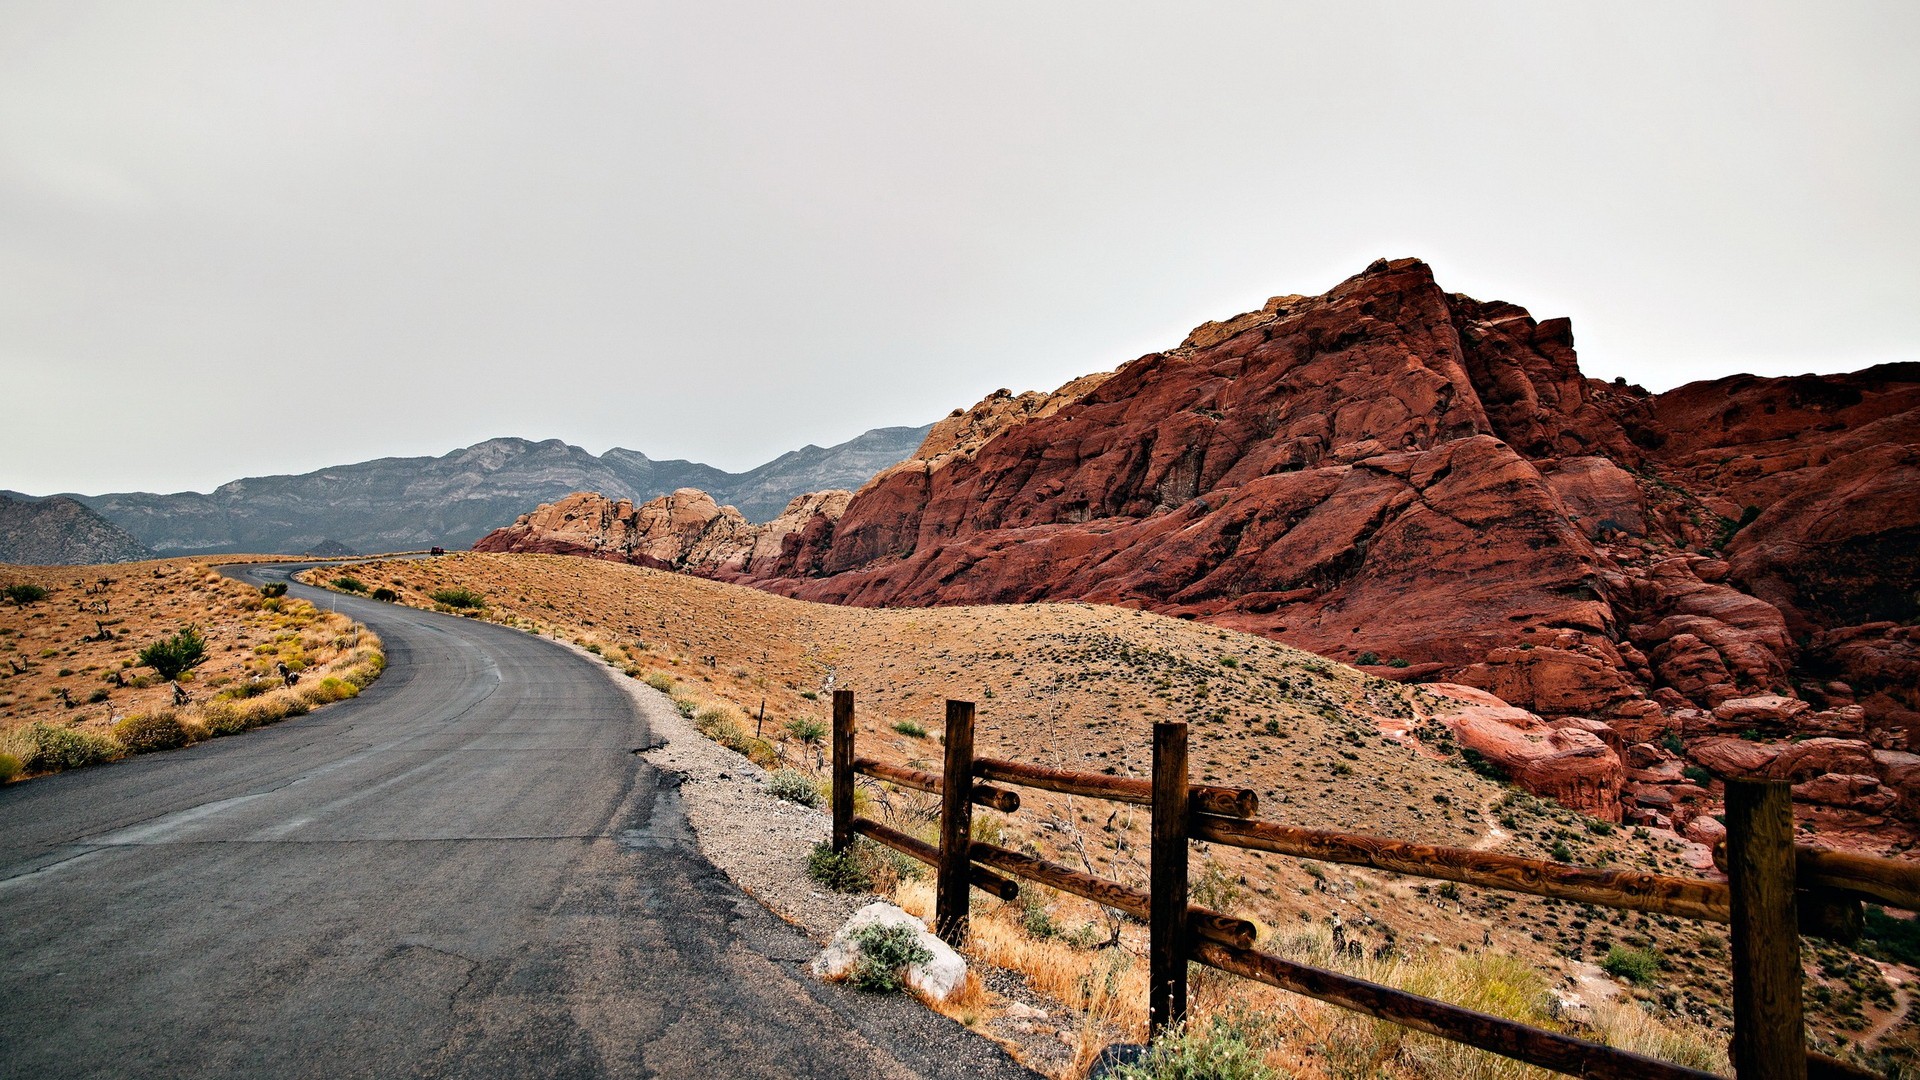 Landscape Road Mountains Badlands Nature Red Rock Canyon 1920x1080